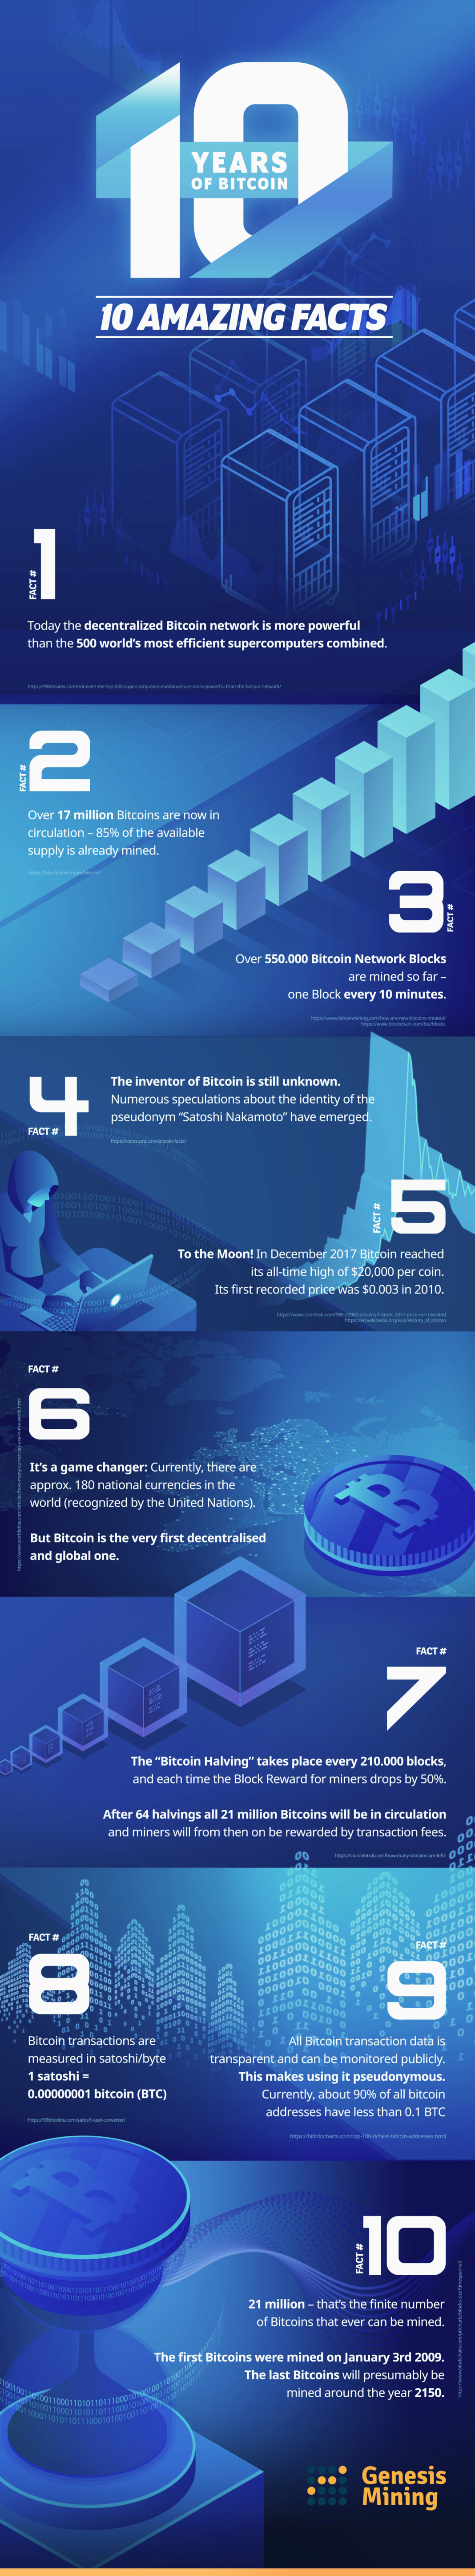 Happy Birthday Bitcoin! 10 Facts for 10 Years of the Network.